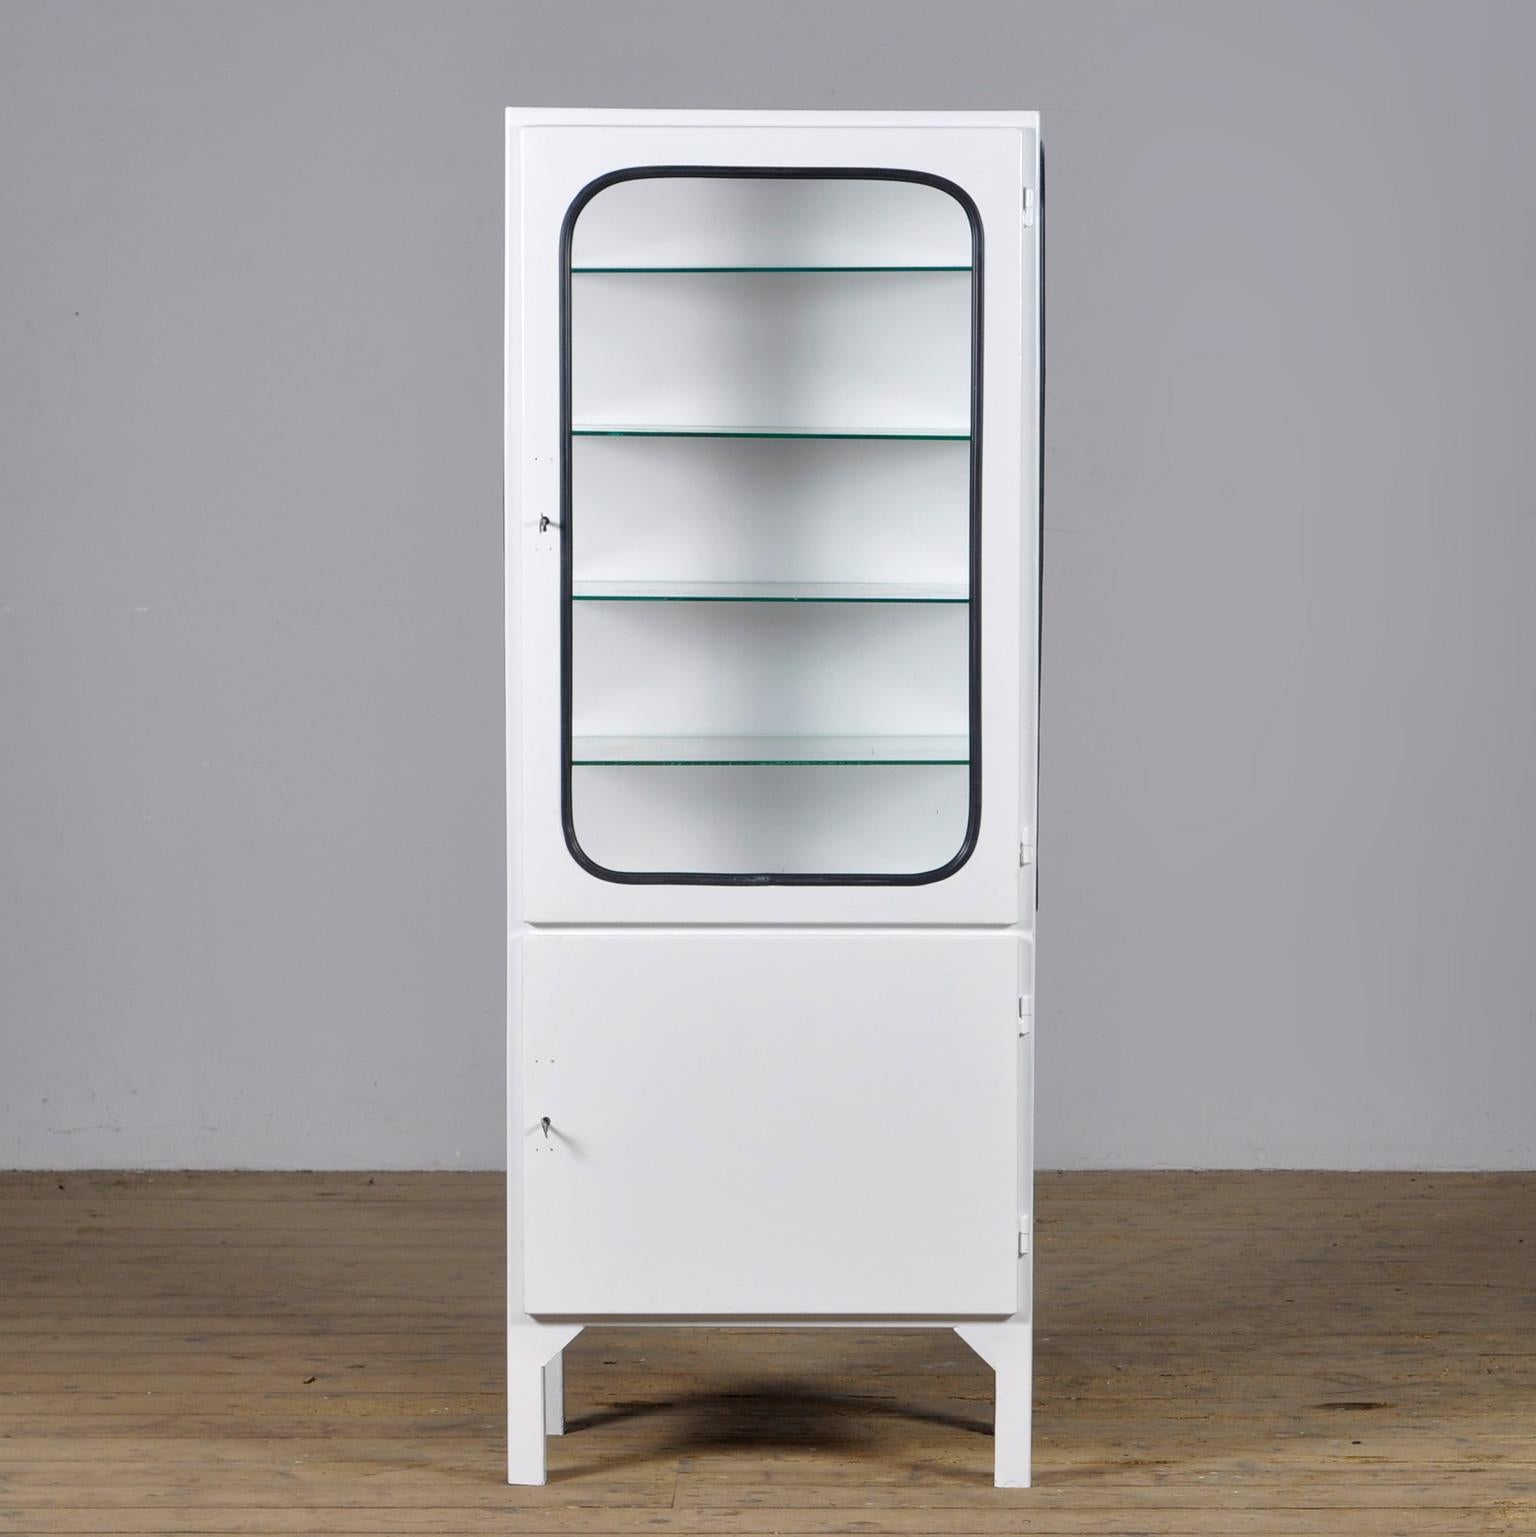 This medical cabinet was designed in the 1970s and was produced circa 1975 in hungary. It is made from iron and glass, and the glass is held by a black rubber strip. The cabinet features four adjustable glass shelves and a functioning lock. 